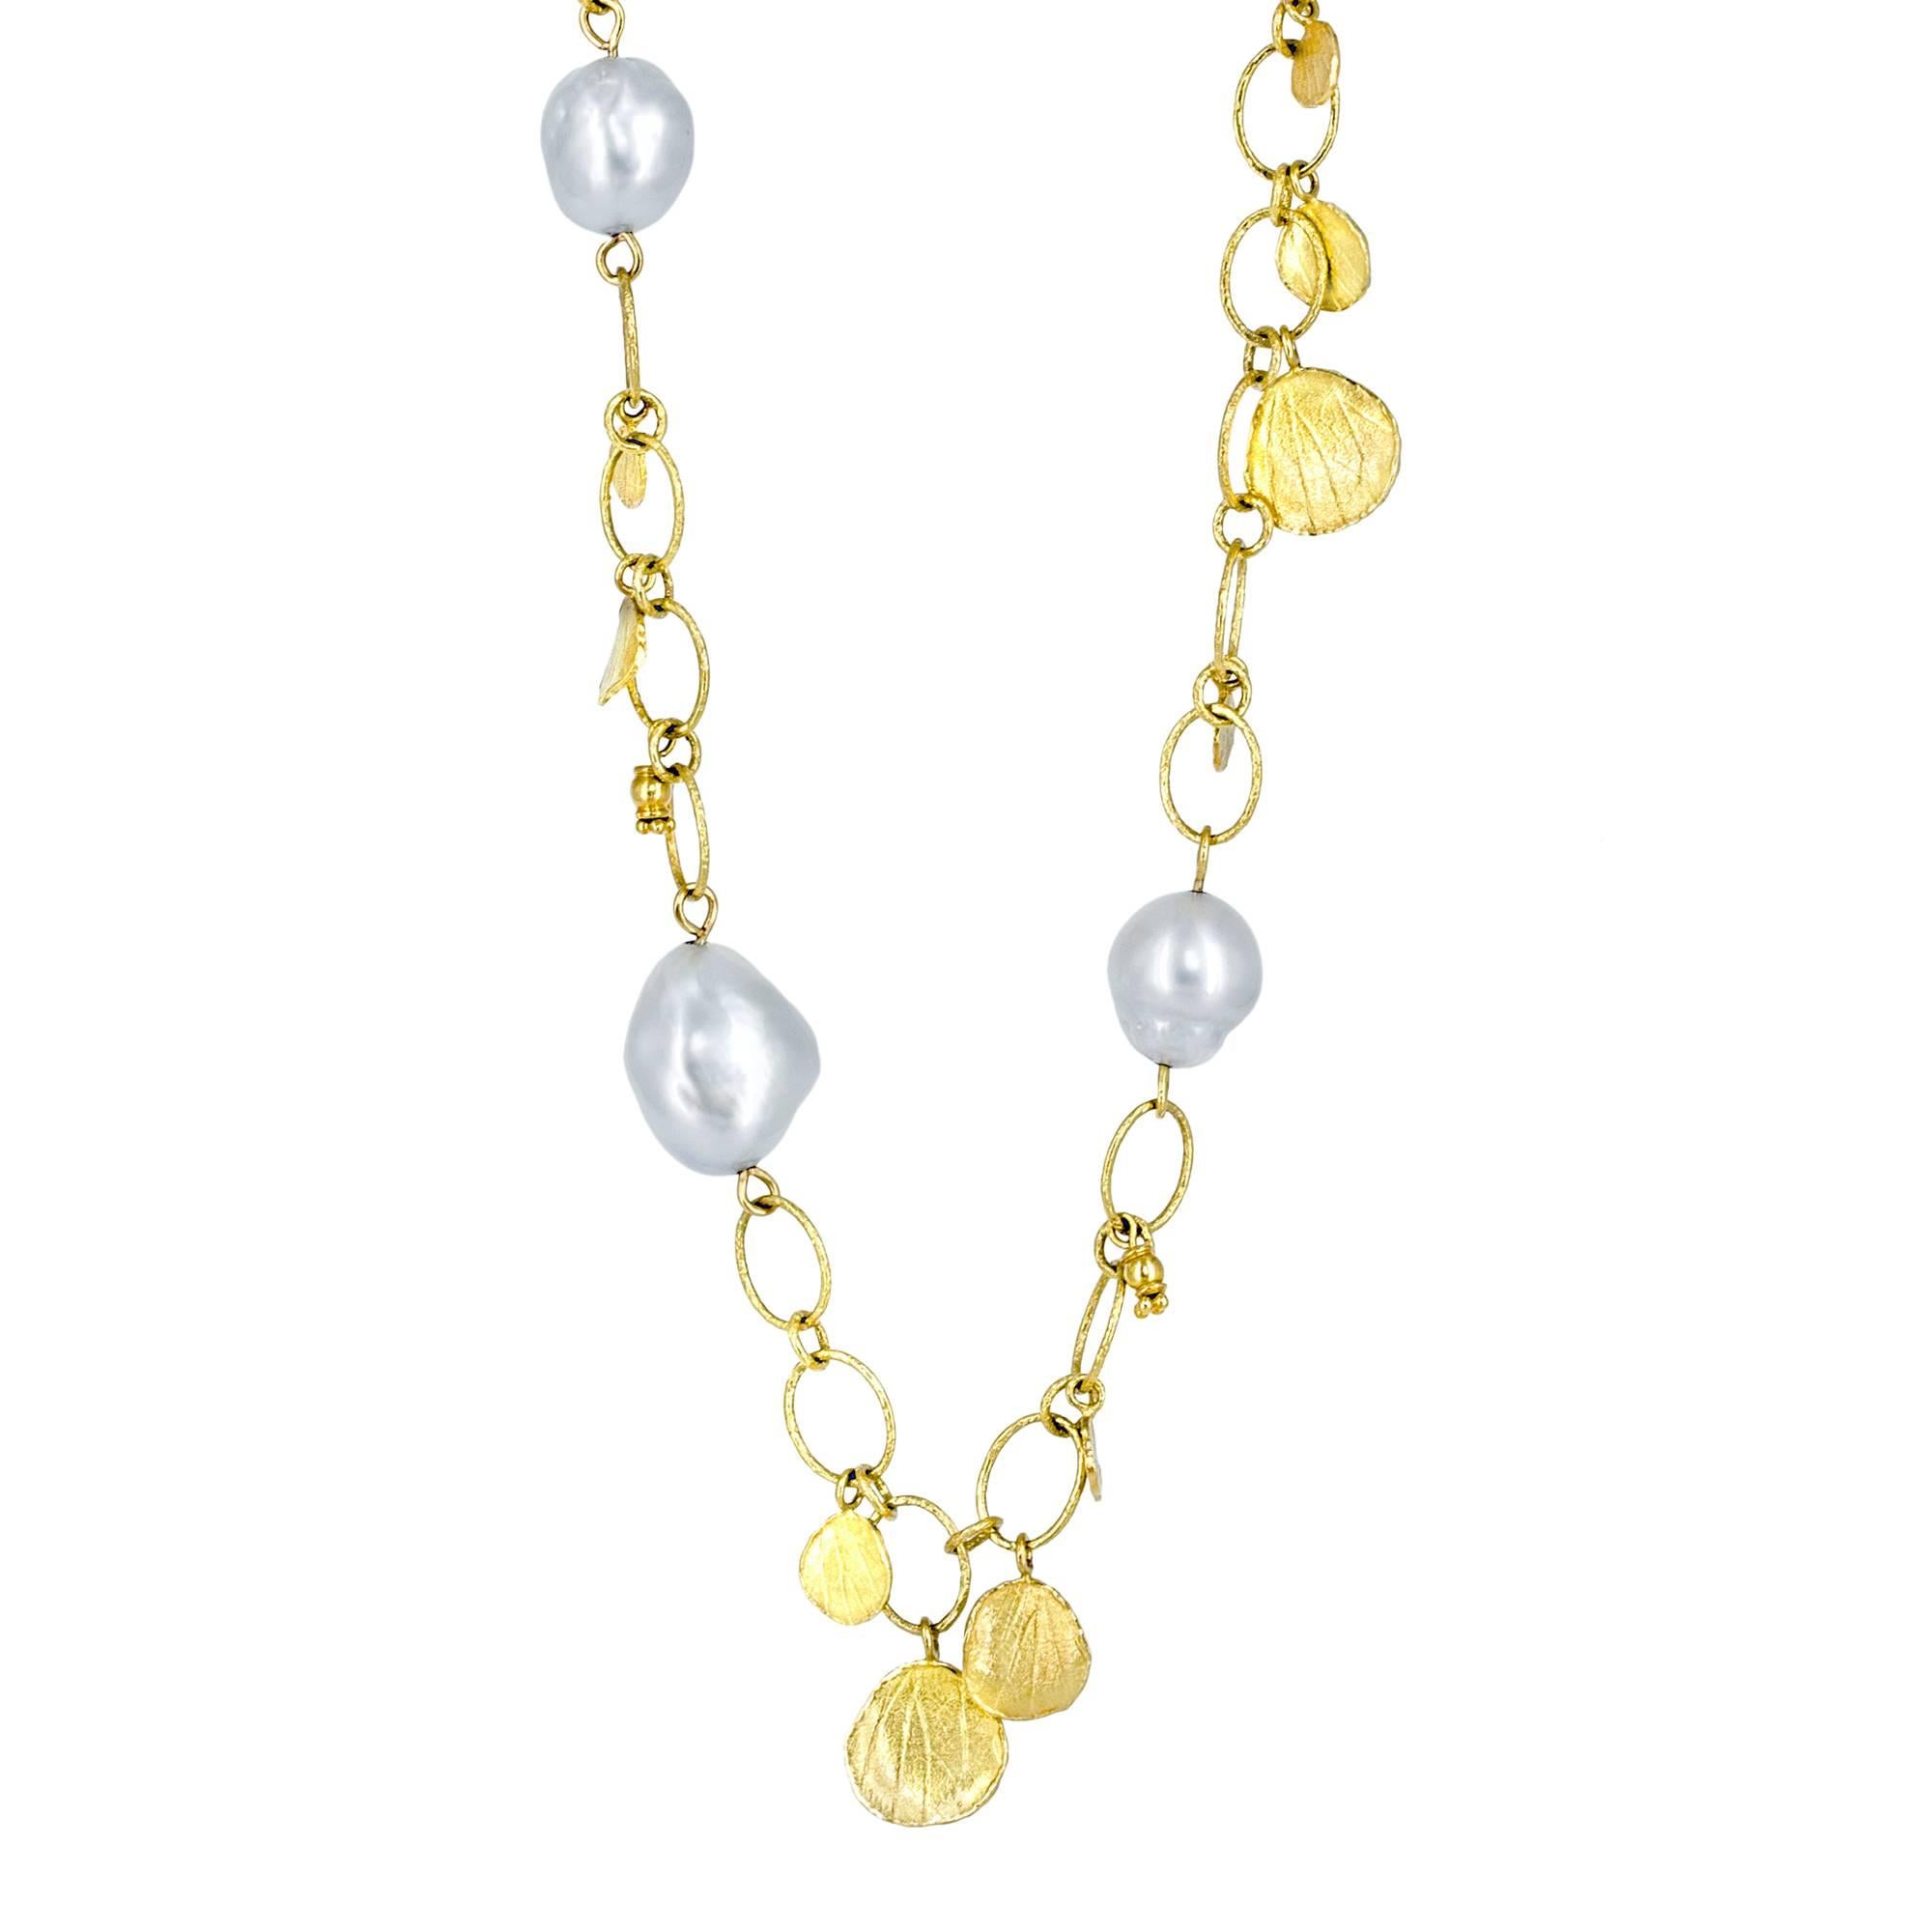 Petals Necklace handcrafted by jewelry artist Barbara Heinrich on a handmade specially-finished 36.25 inch long 18k yellow gold oval and round link chain, featuring eleven lustrous light silvery blue baroque pearls and accented by forty-one